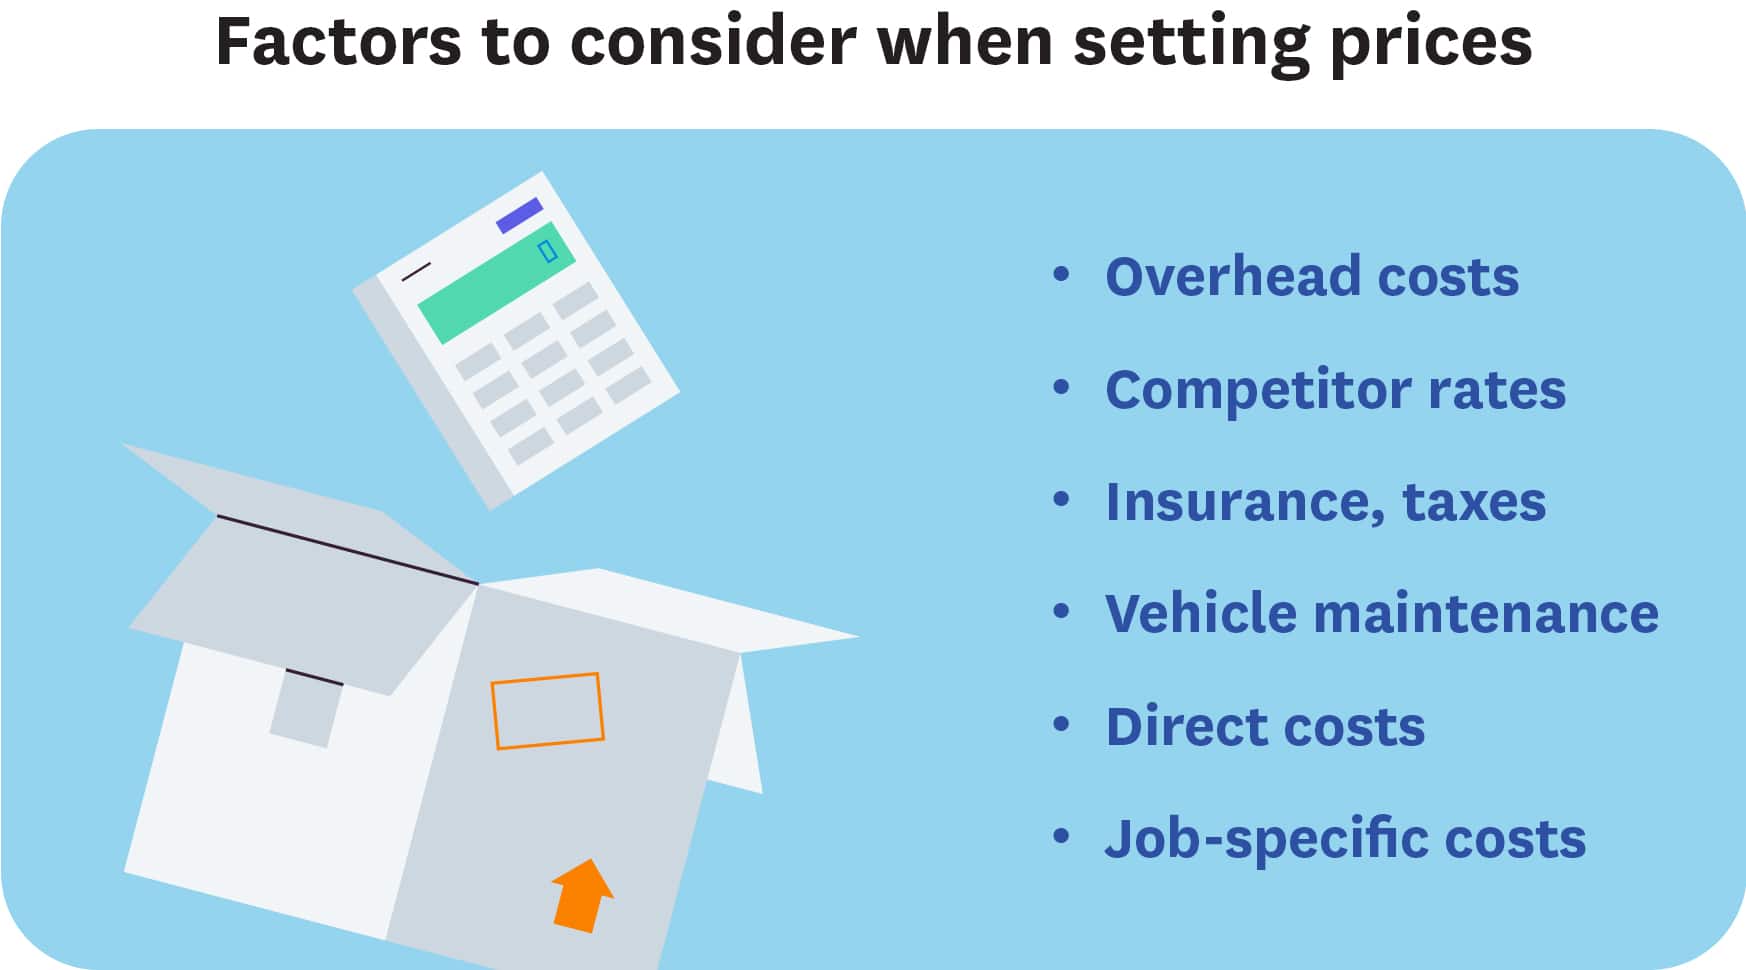 Before starting a moving business, consider overhead costs, competitor rates, insurance, taxes, and vehicle maintenance.